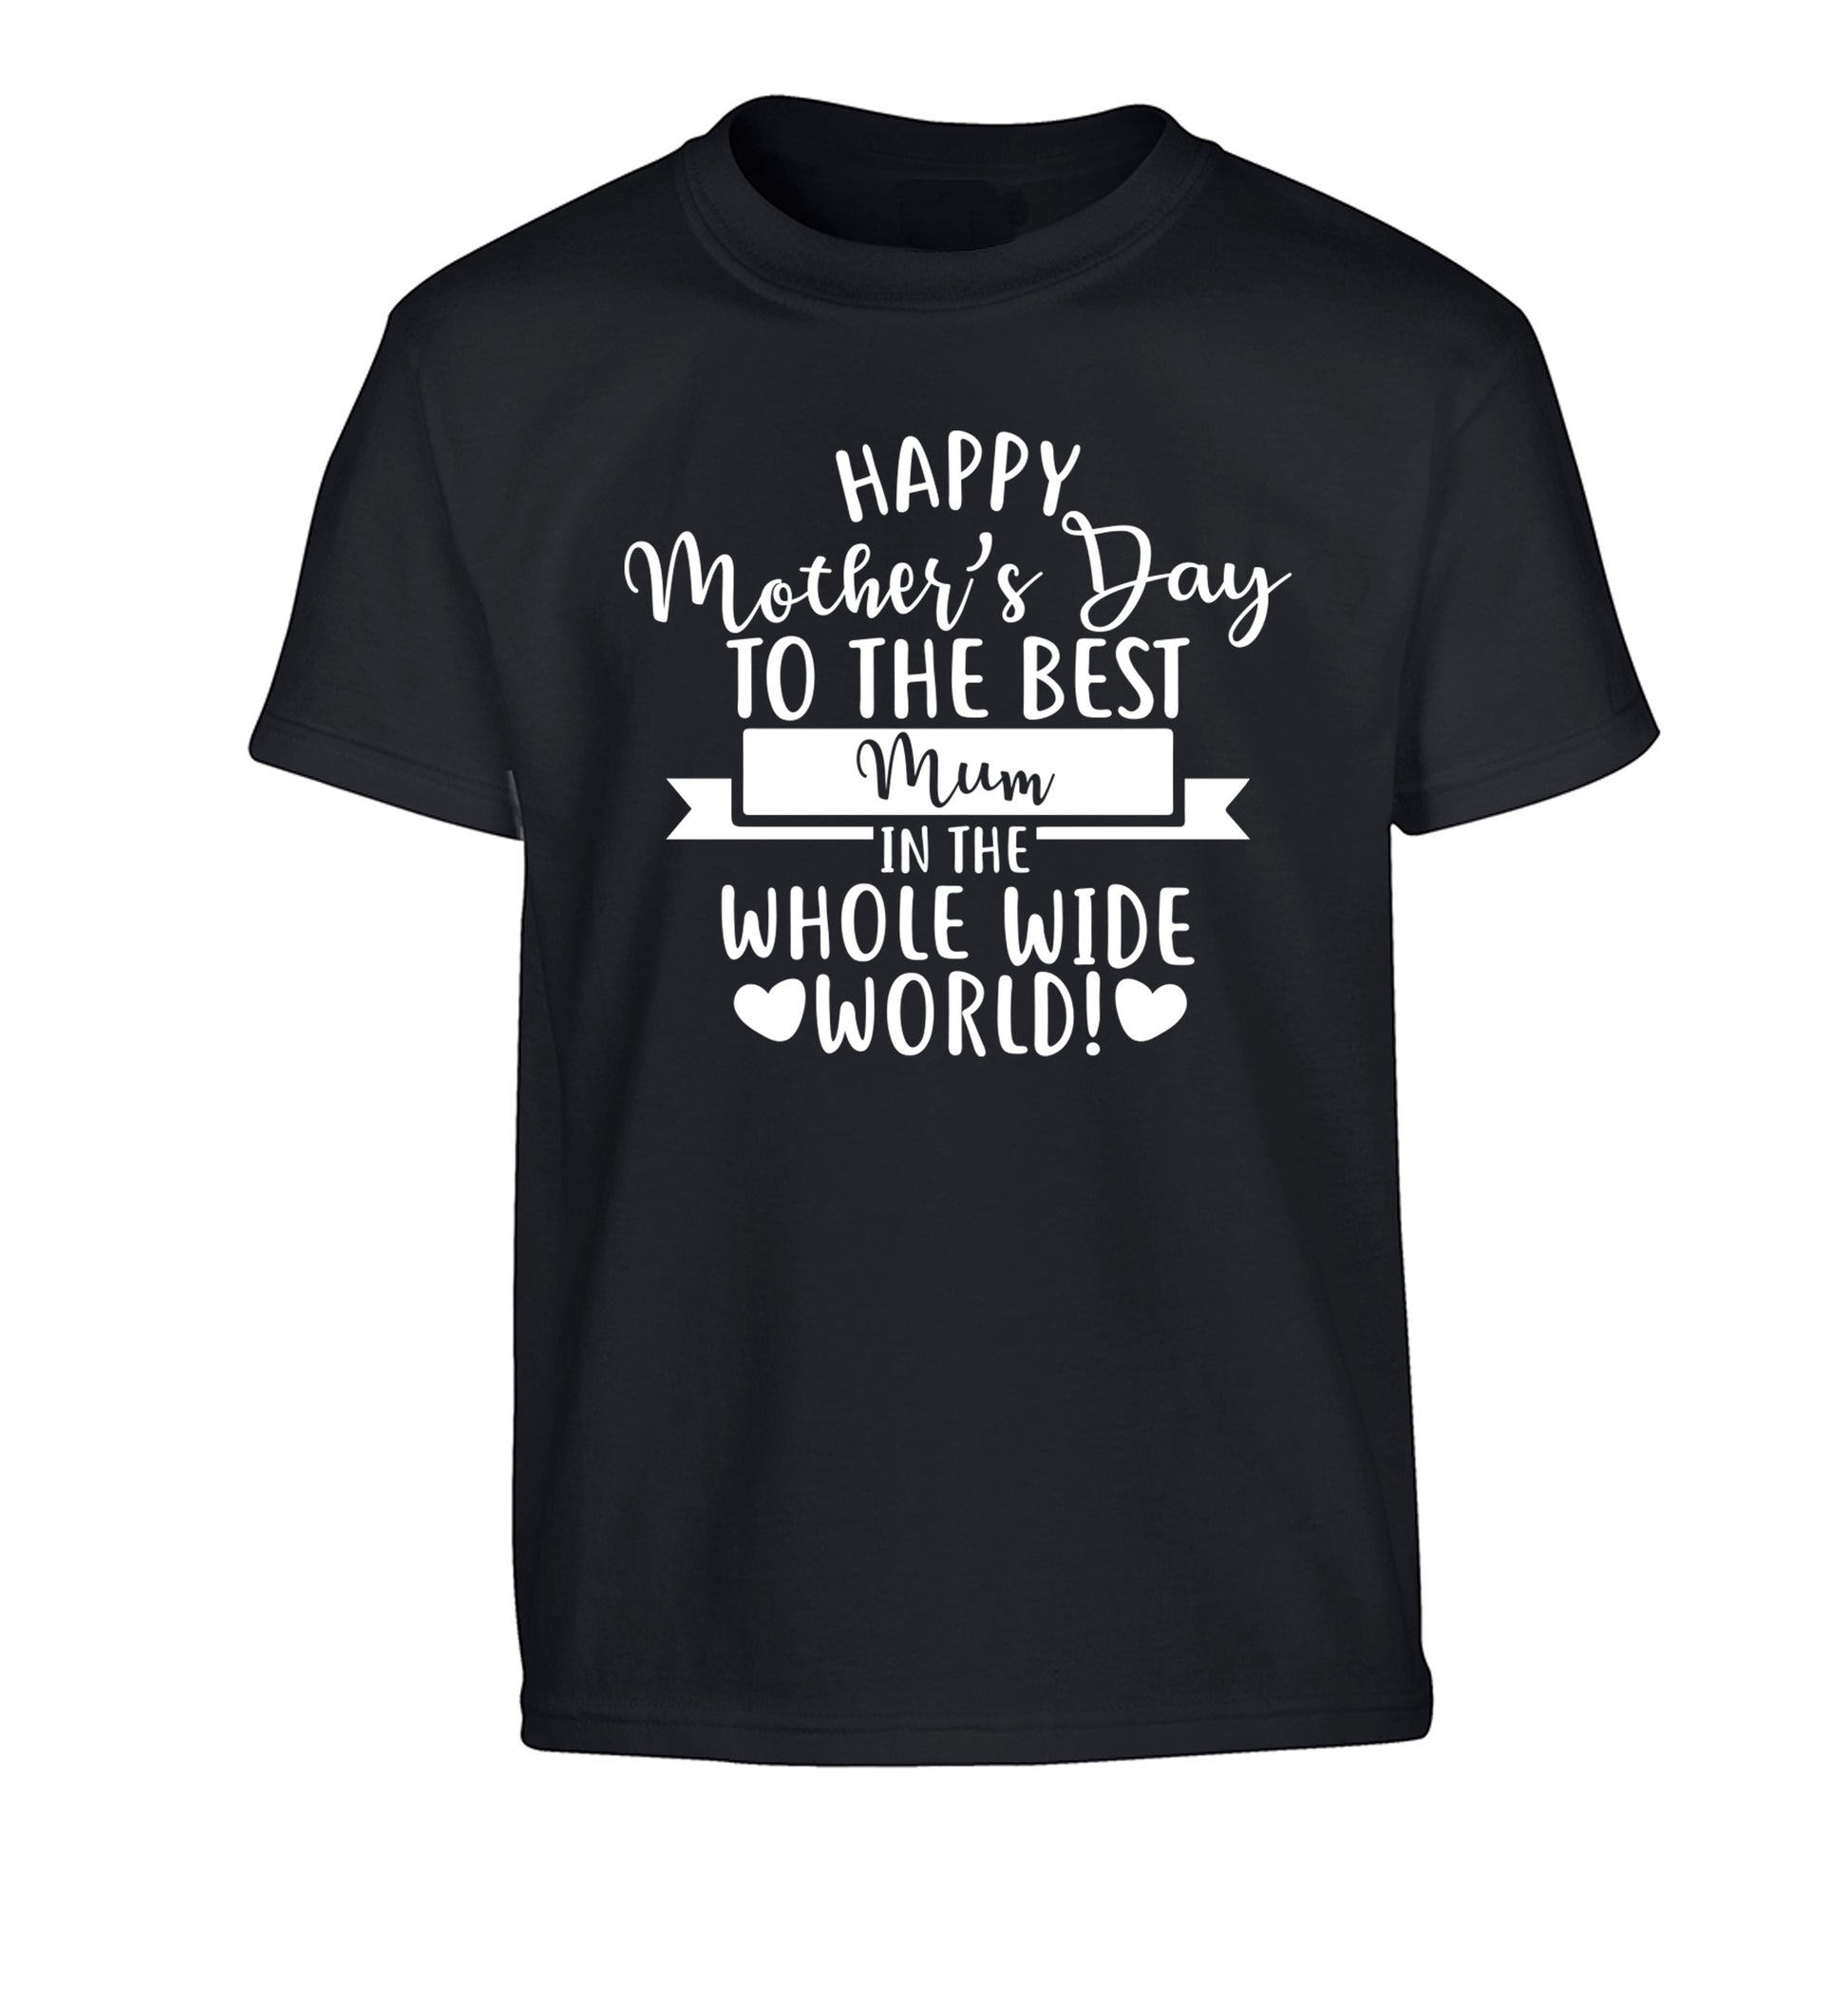 Happy Mother's Day to the best mum in the whole wide world! Children's black Tshirt 12-13 Years